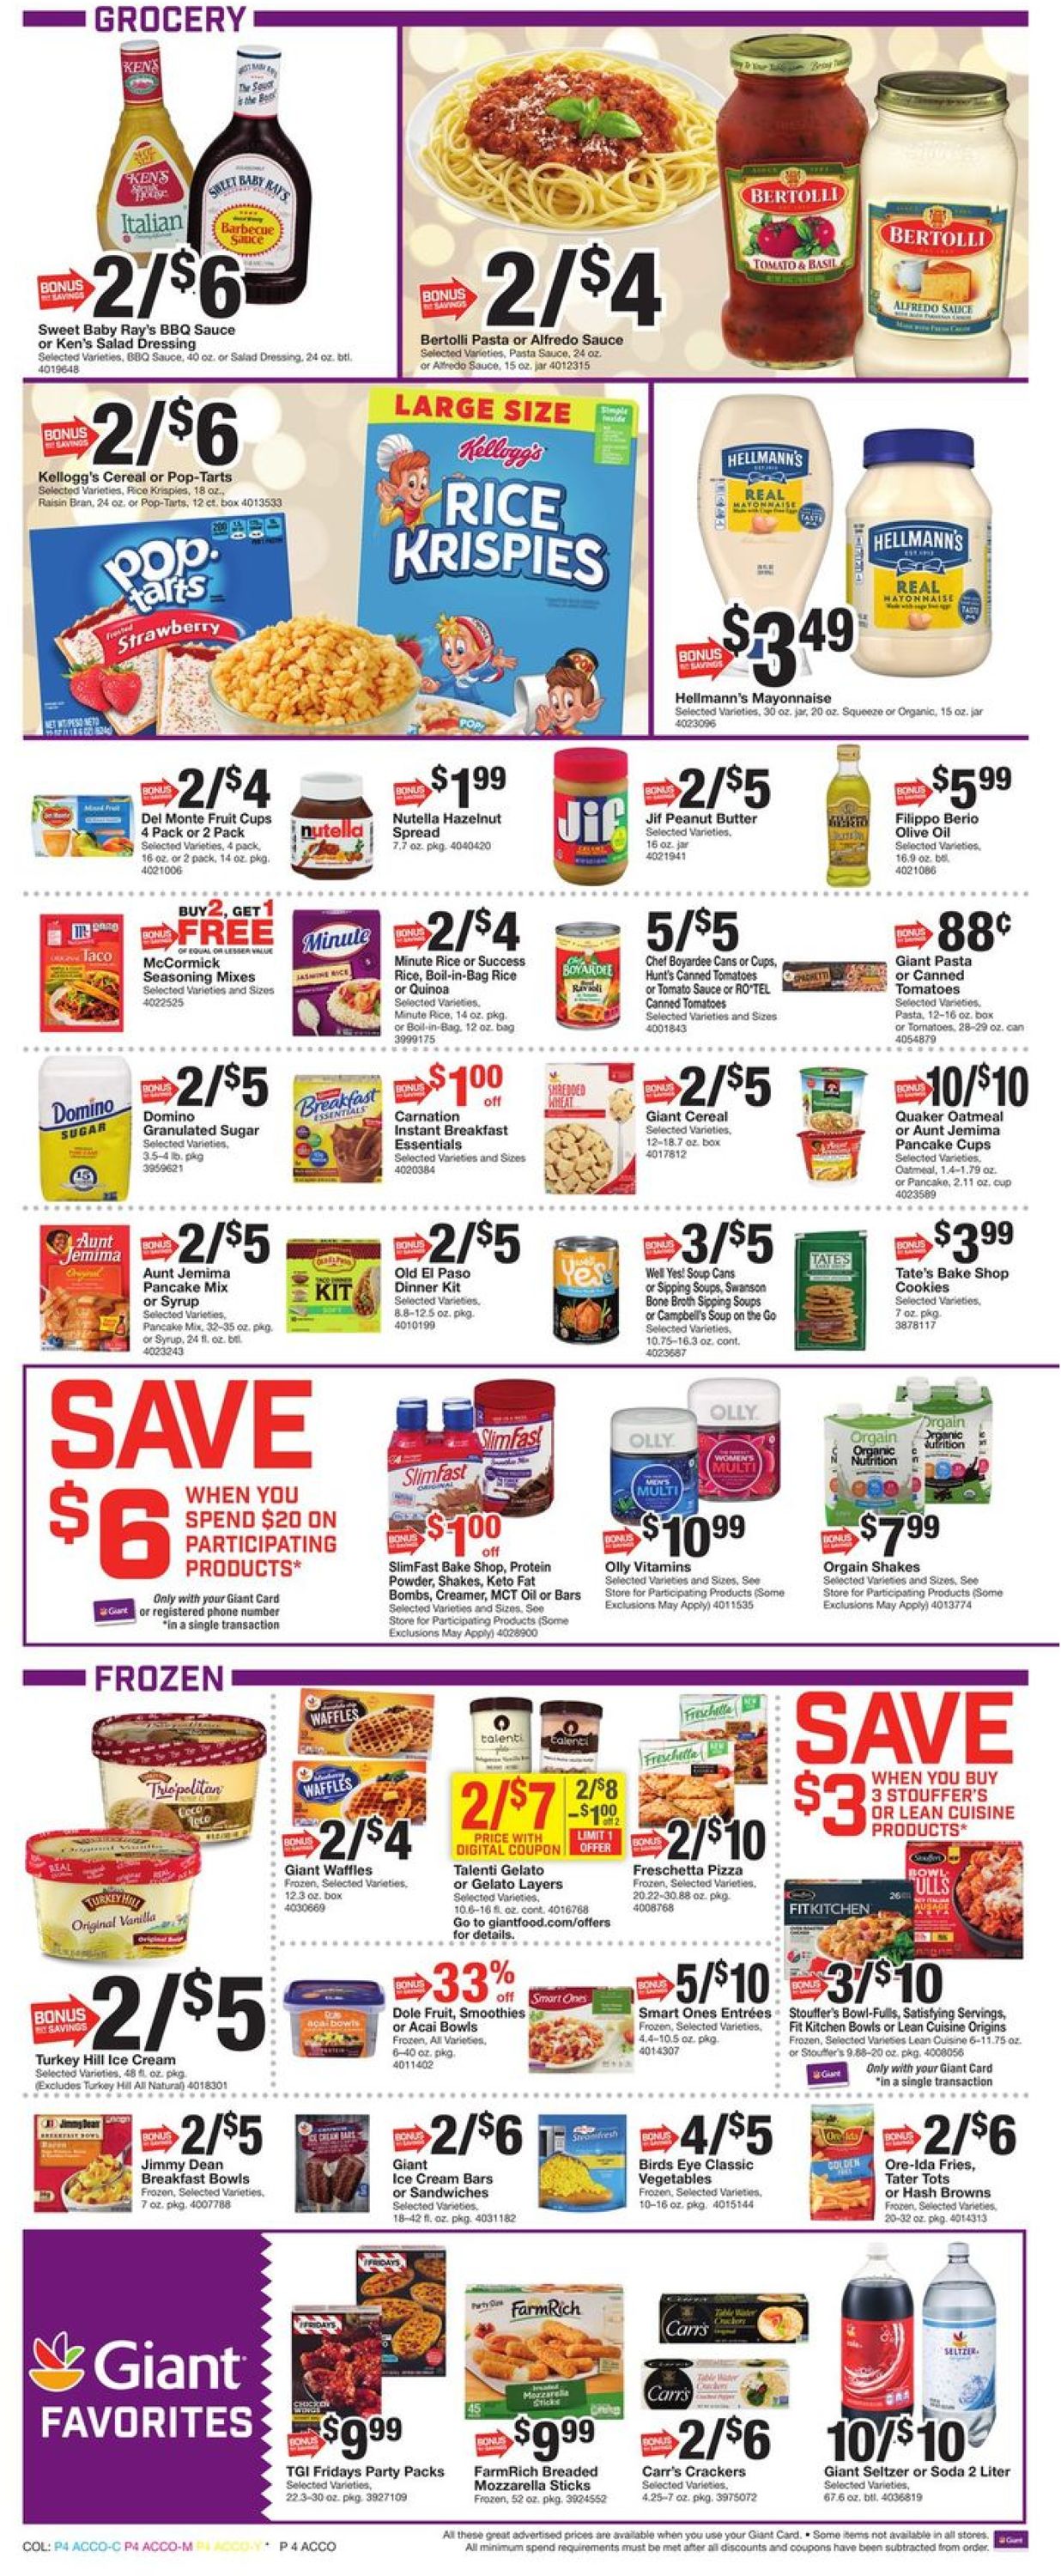 Giant Food - New Year's Ad 2019/2020 Weekly Ad Circular - valid 12/27-01/02/2020 (Page 6)